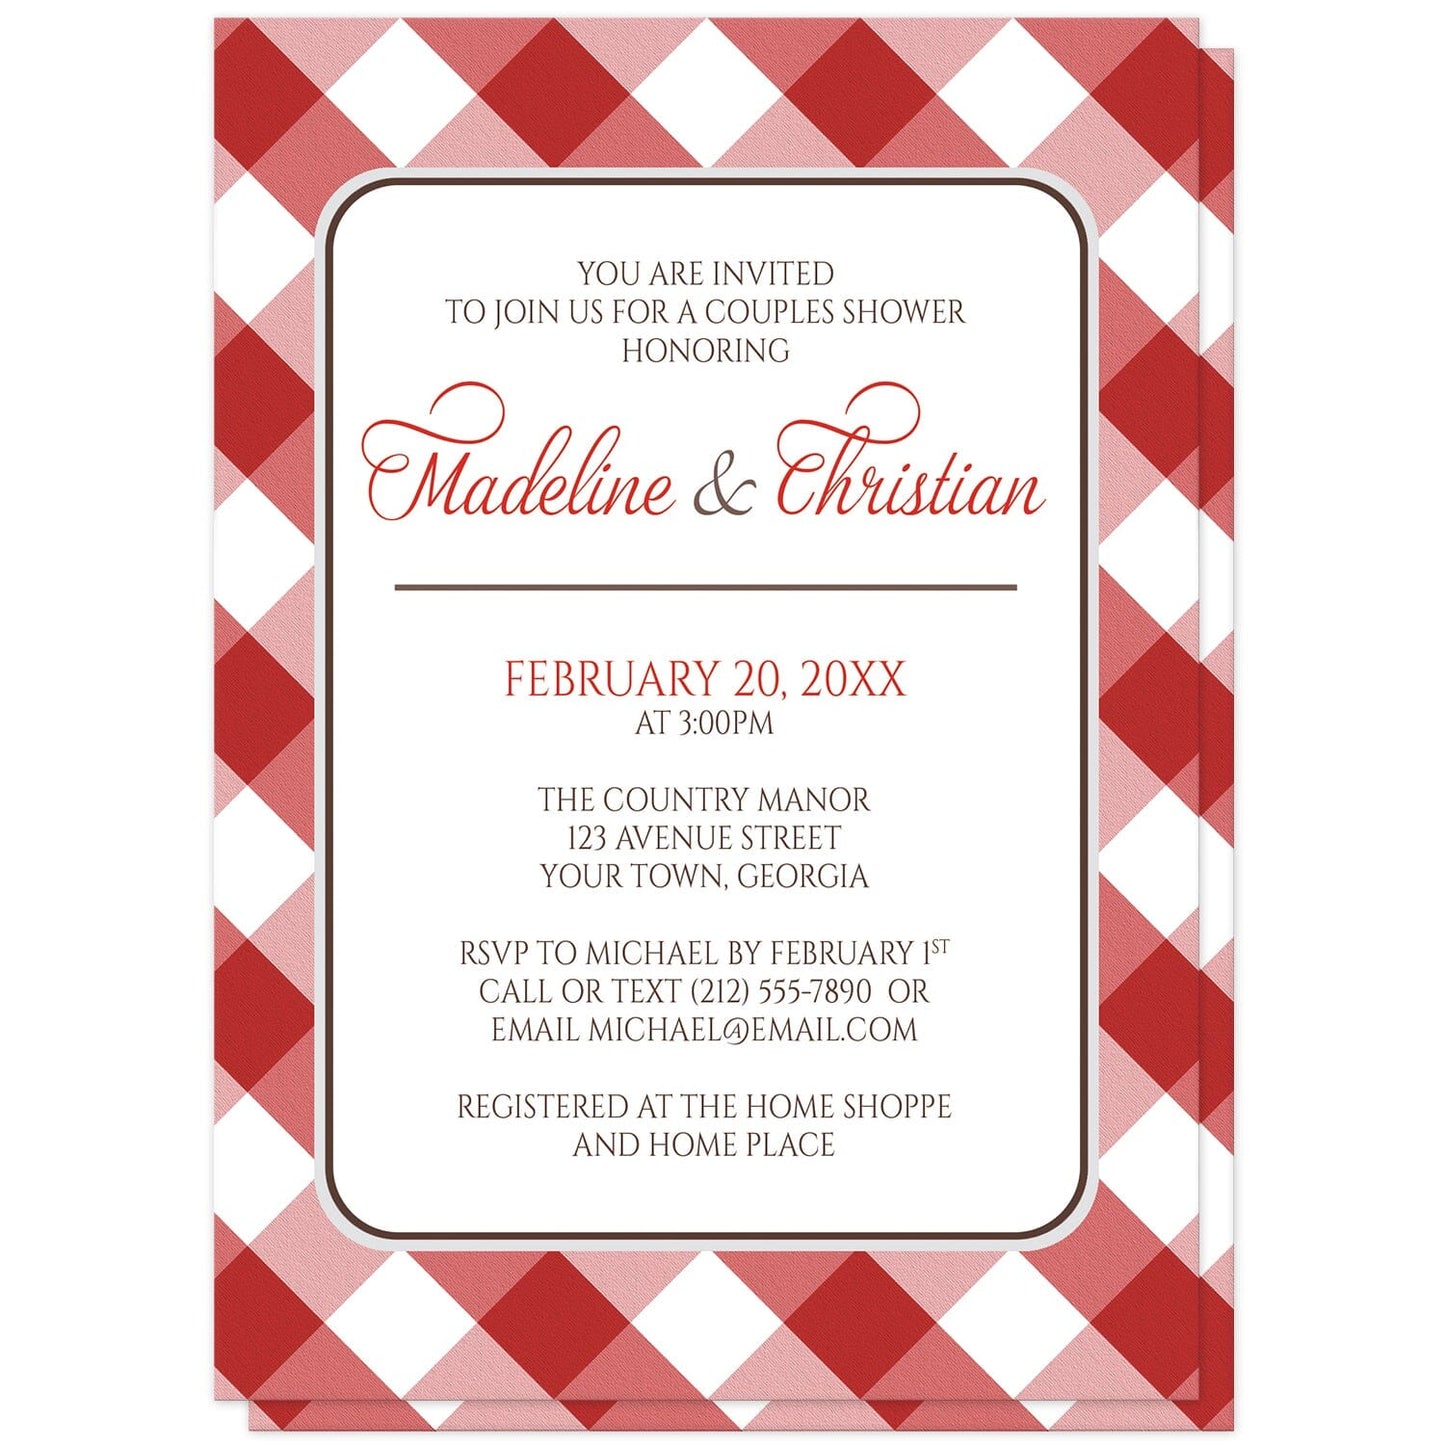 Red Gingham Couples Shower Invitations at Artistically Invited. Red gingham couples shower invitations with your personalized couples shower celebration details custom printed in red and brown on white in the center, over a diagonal red gingham check pattern background. The red and white gingham pattern is also printed on the back side.